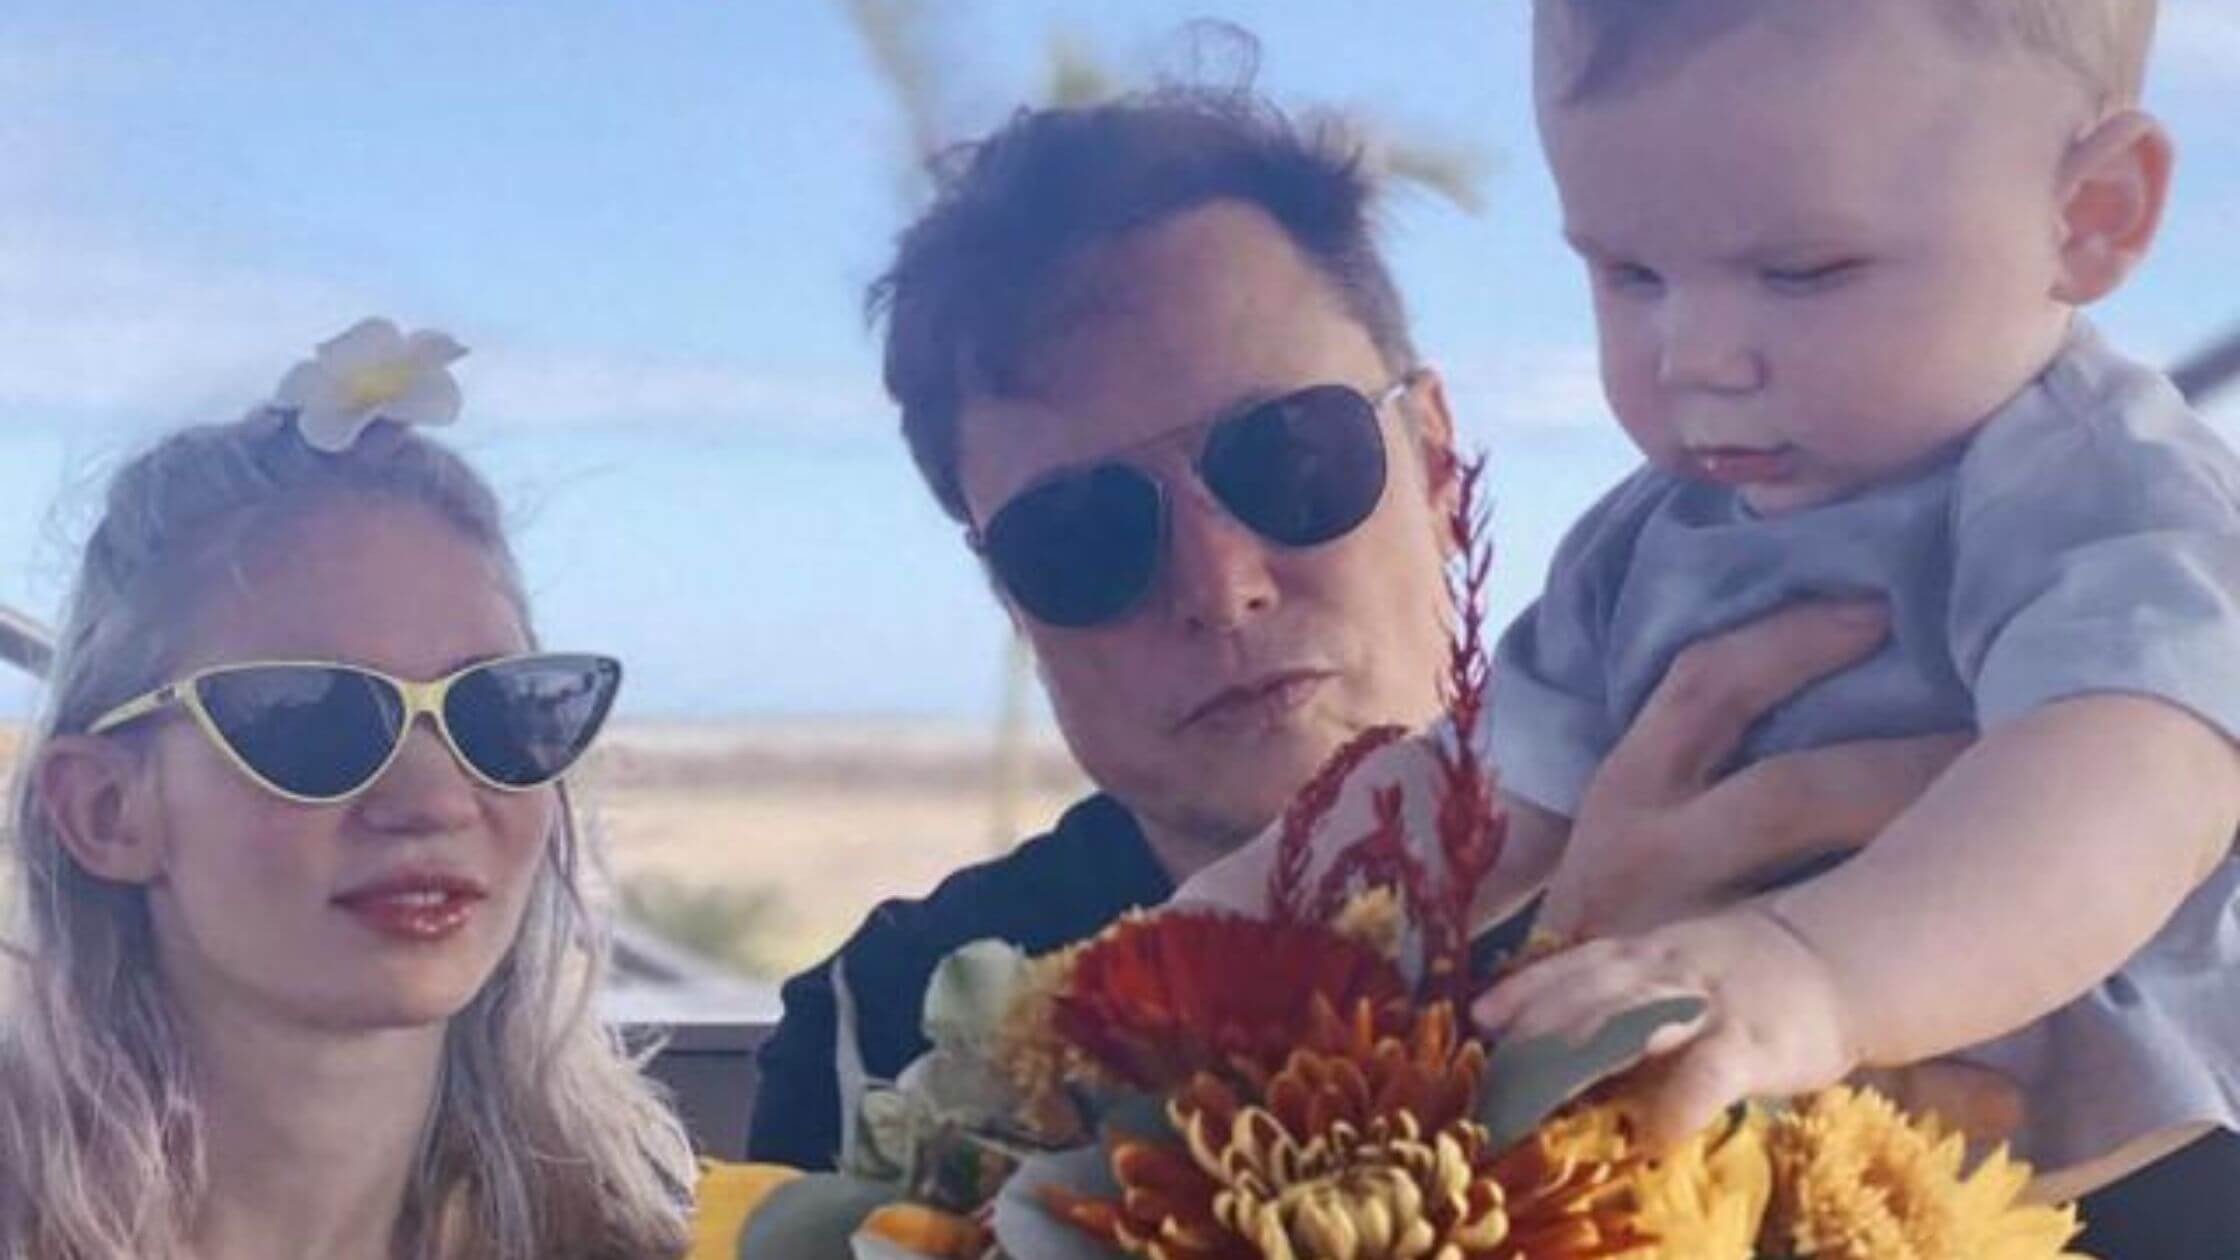 Elon Musk And Shivon Zilis Had Twins Last Year Just Weeks Before His And Grimes' Baby Was Born